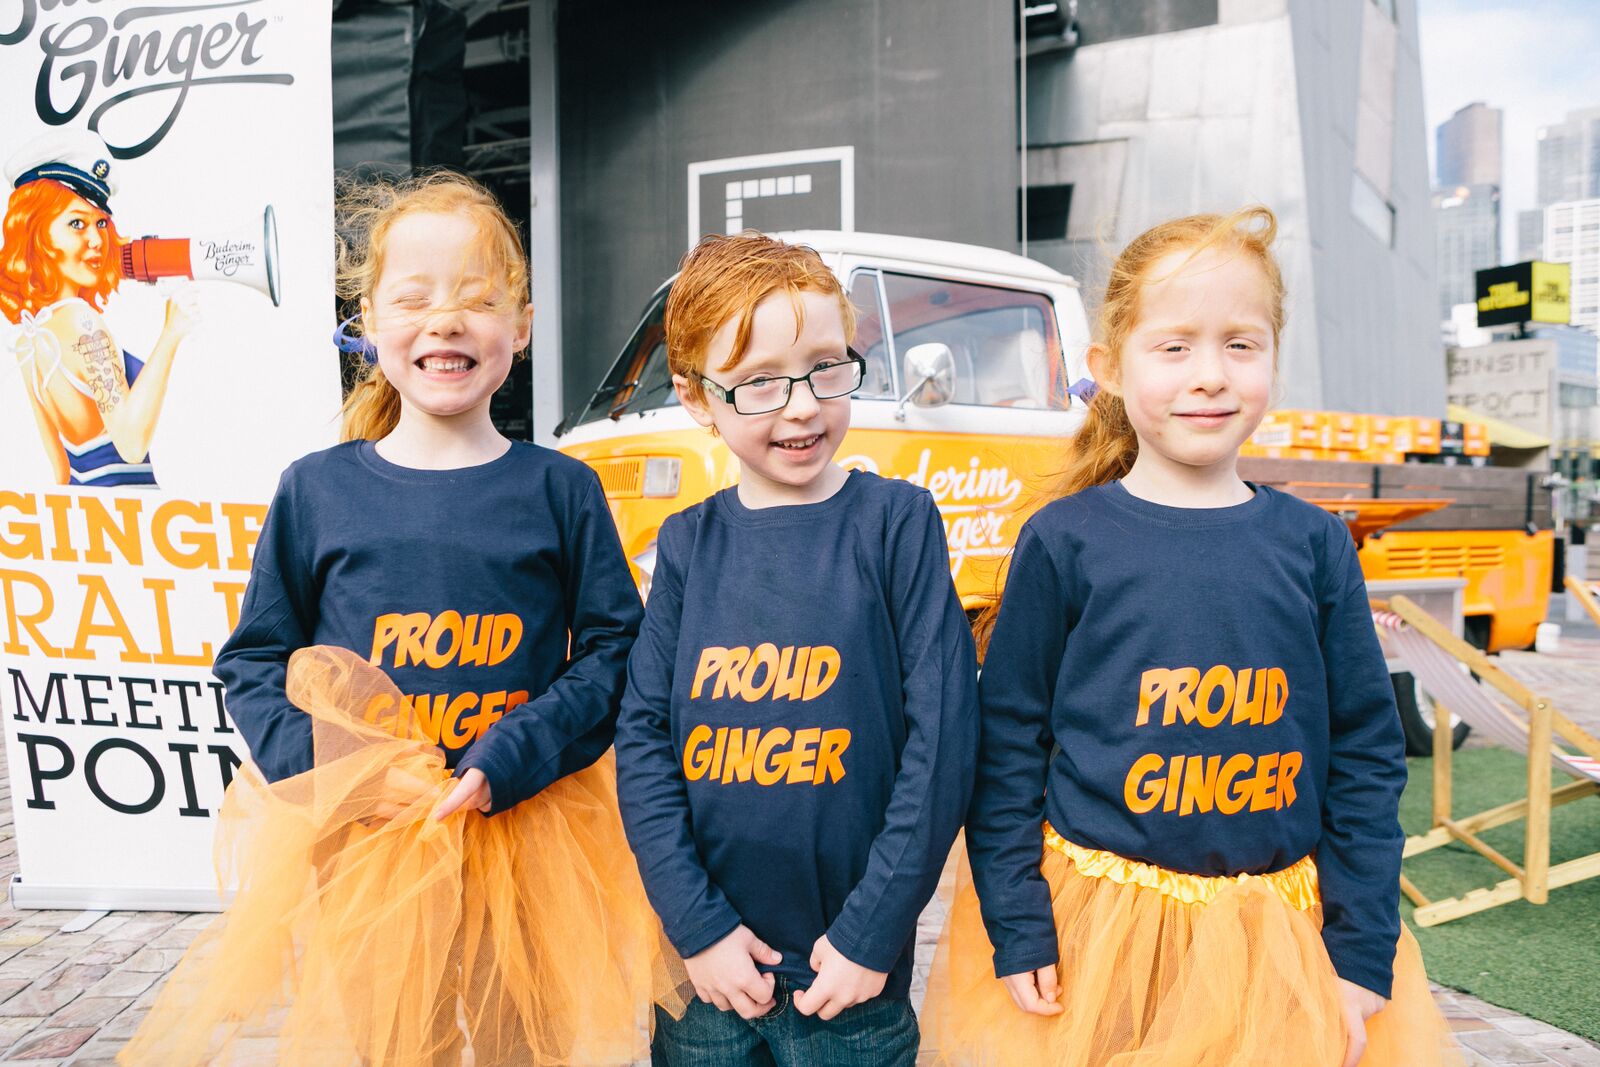 ginger pride march